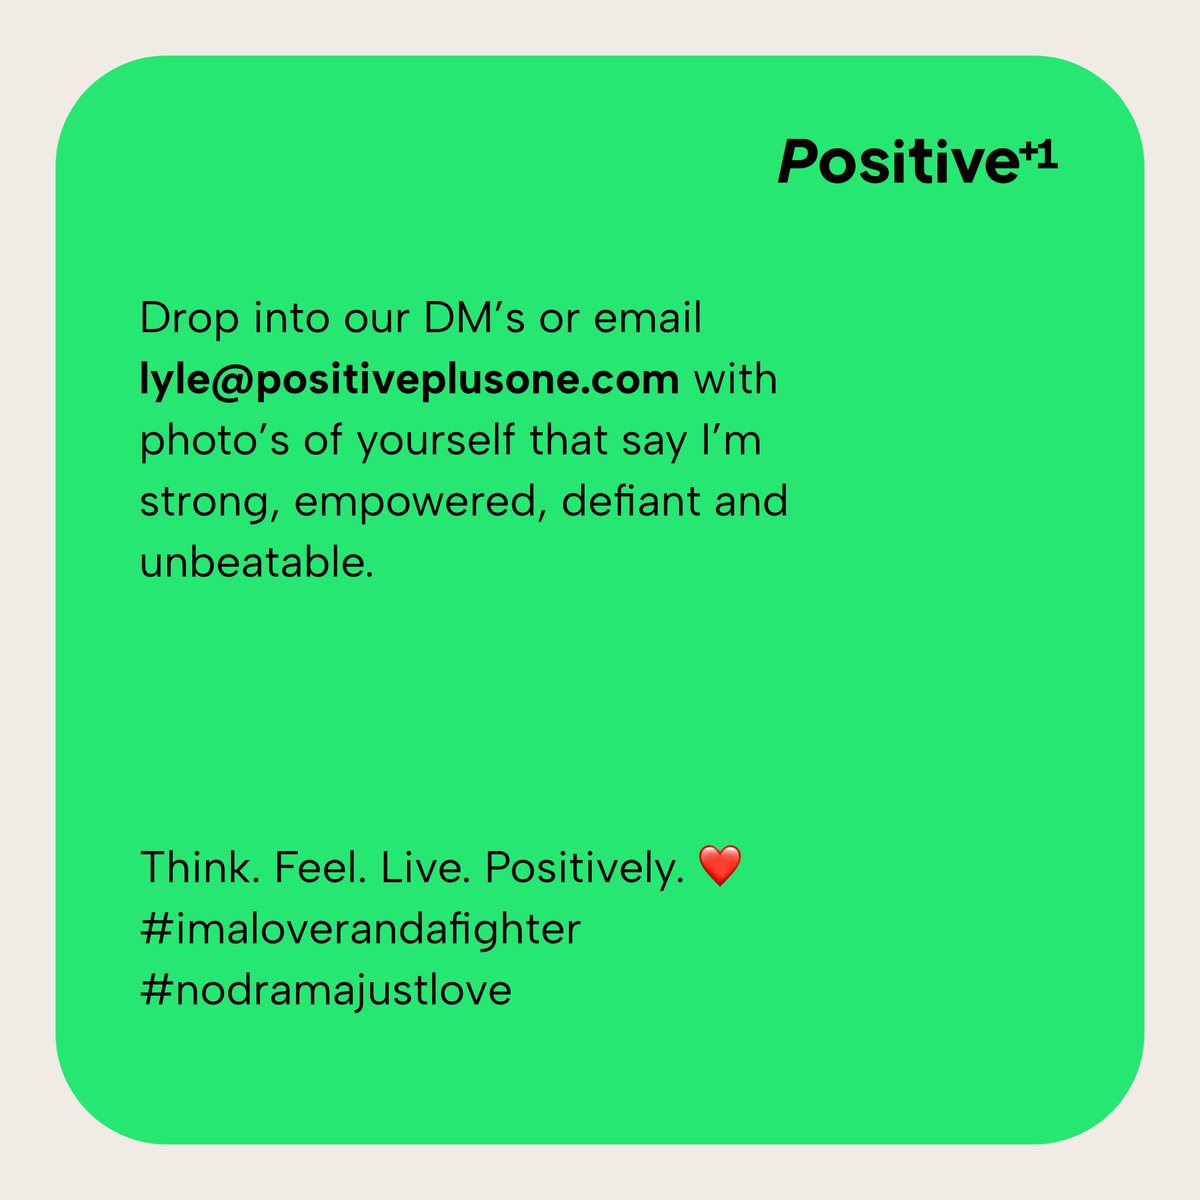 3RD AND FINAL CALL FOR BOLD, FEARLESS, EMPOWERED FIGHTERS! ❤️ Questions? Drop into our DM’s or email lyle@positiveplusone.com Think. Feel. Live. Positively. ❤️ PLEASE SHARE & REPOST! 👀 #positiveplusone #HIV #stigma #socialmedia #campaign #weneedyou